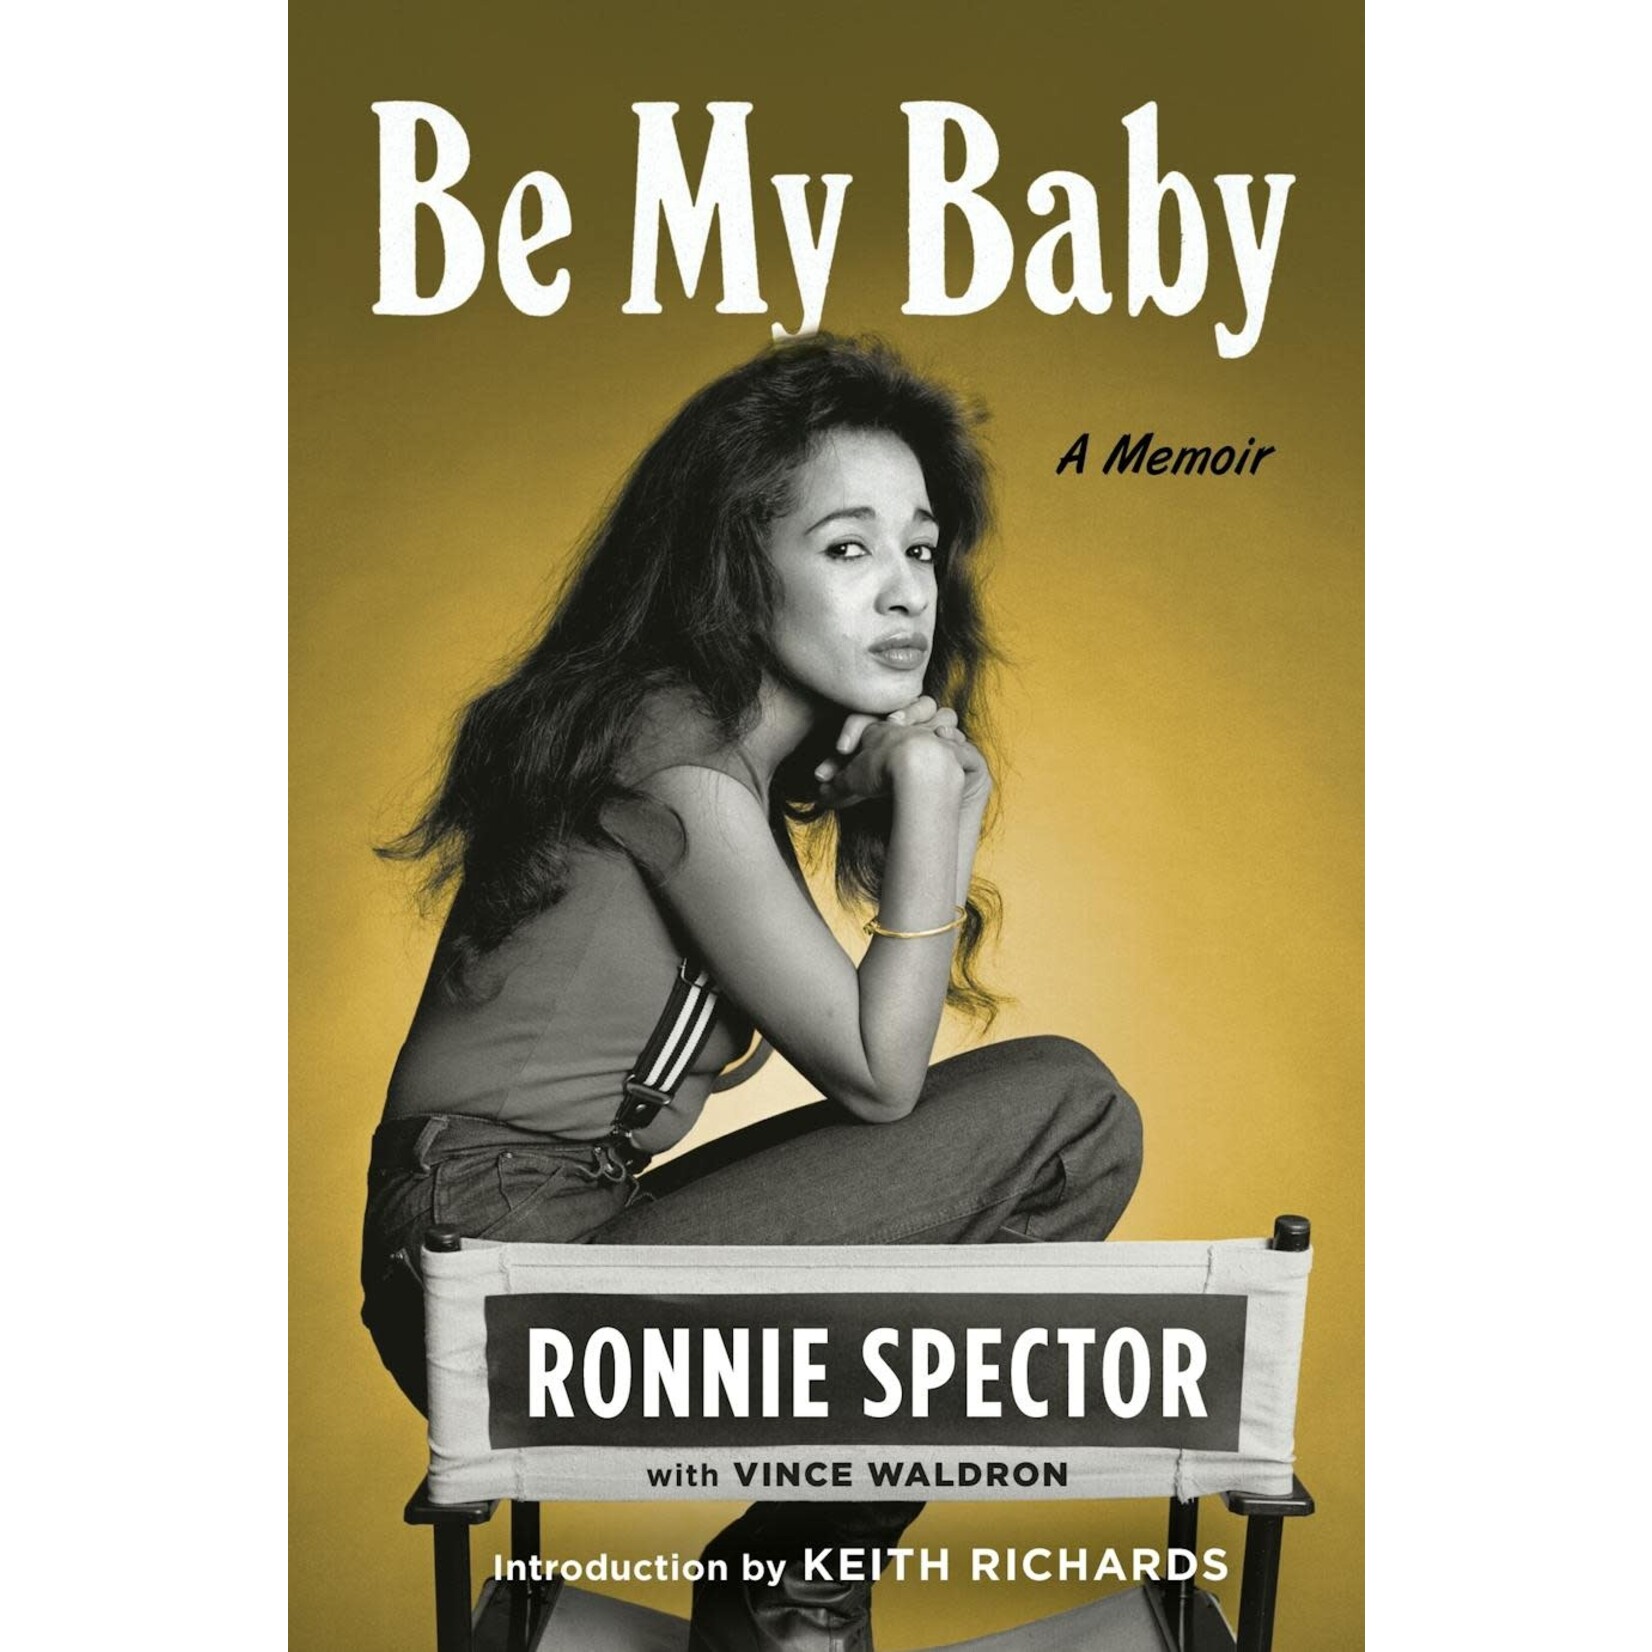 Ronnie Spector (Ronettes) - Be My Baby: A Memoir [Book]